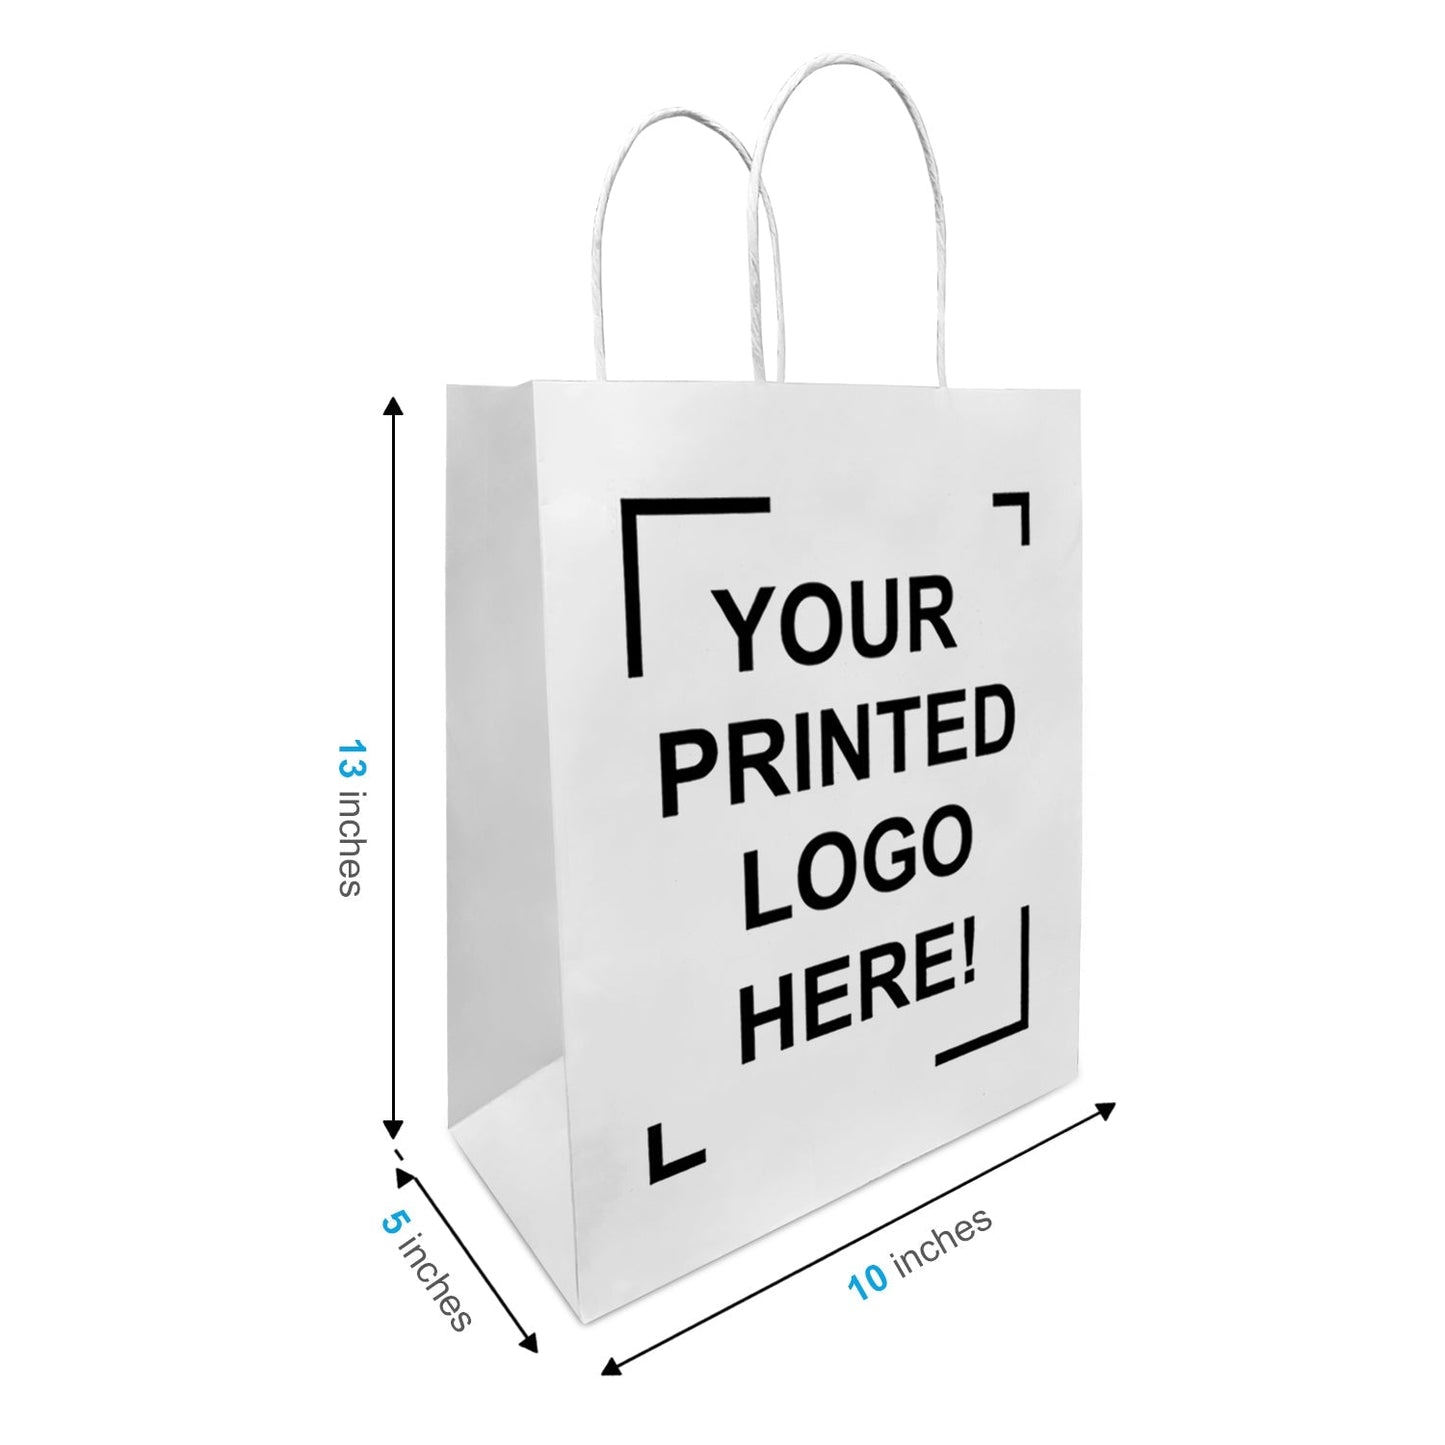 100pcs, 1 Side Print, Debbie 10x5x13 inches White Kraft Paper Bags Twisted Handles, $0.91/bag, Full Color Custom Print, Printed in Canada